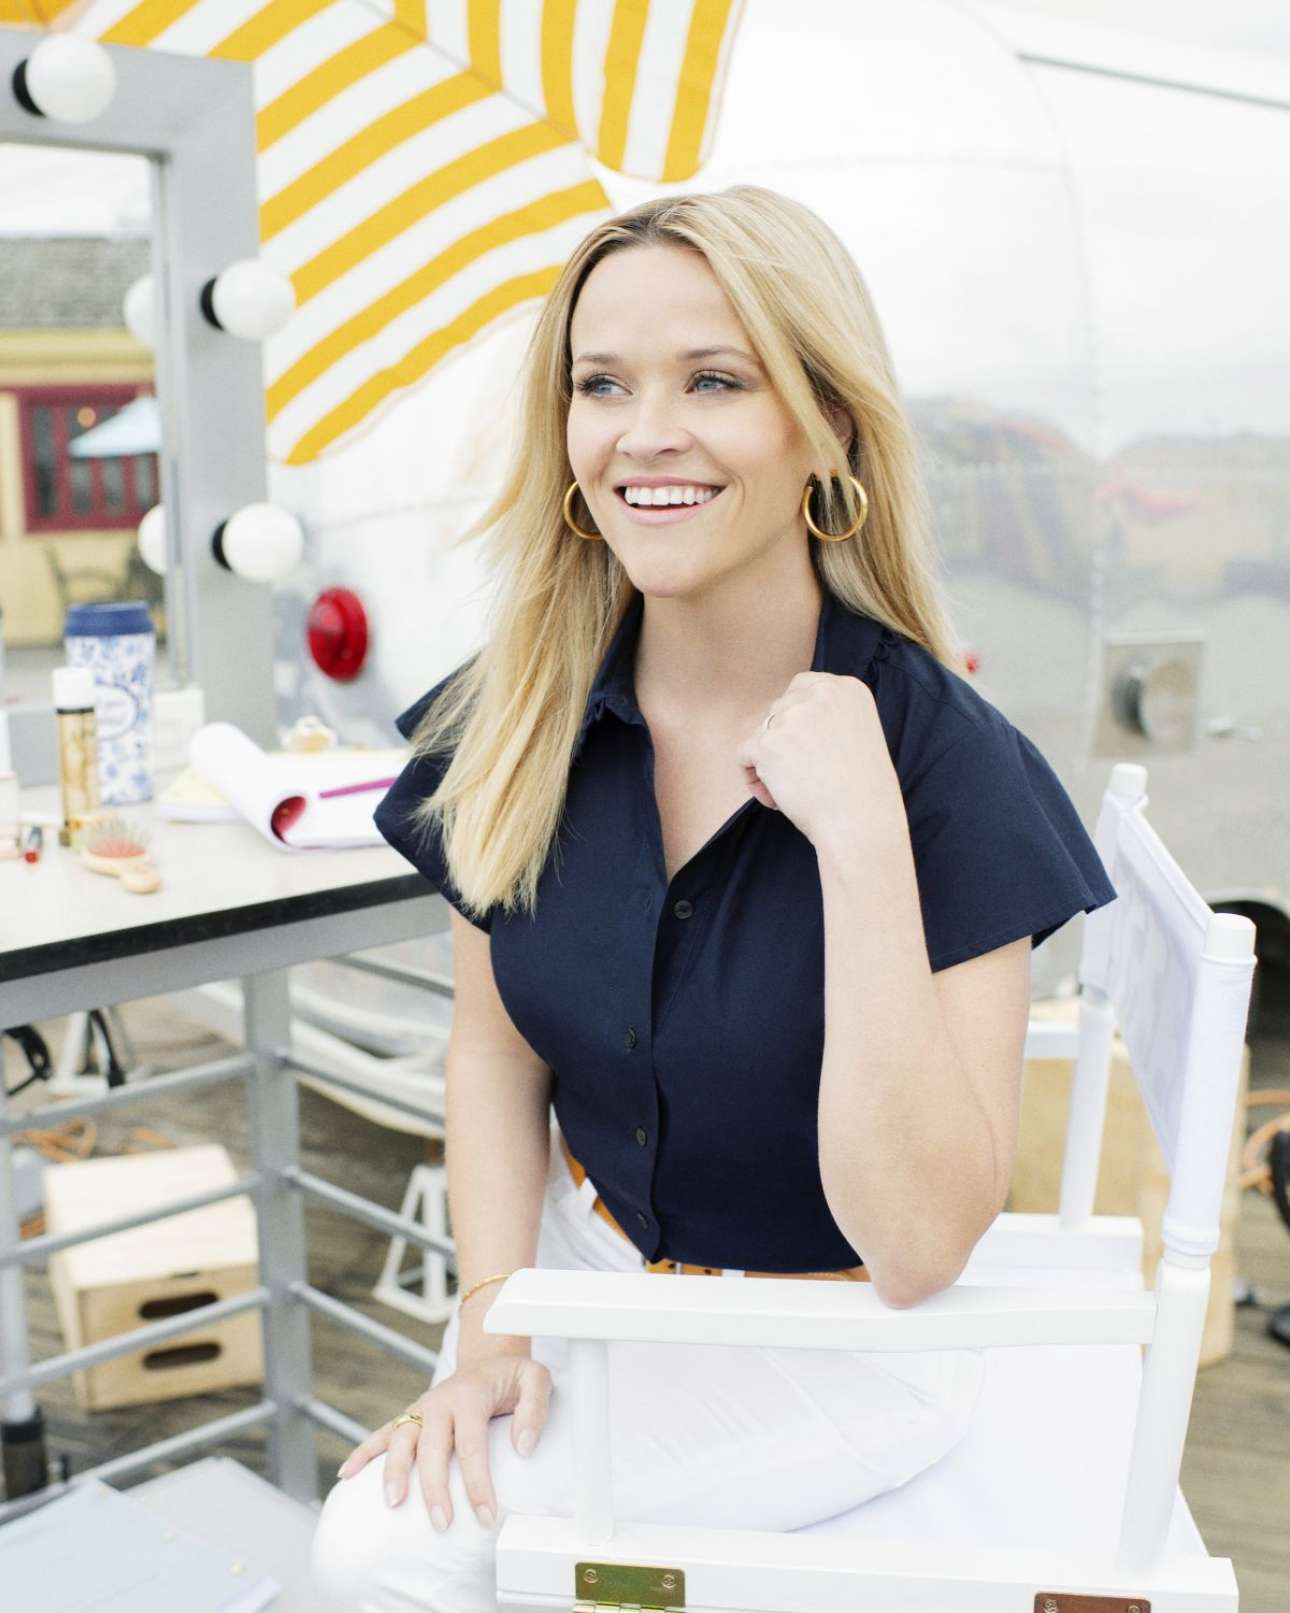 Reese Witherspoon â€“ Photoshoot for Draper James Summer 2018 Collection